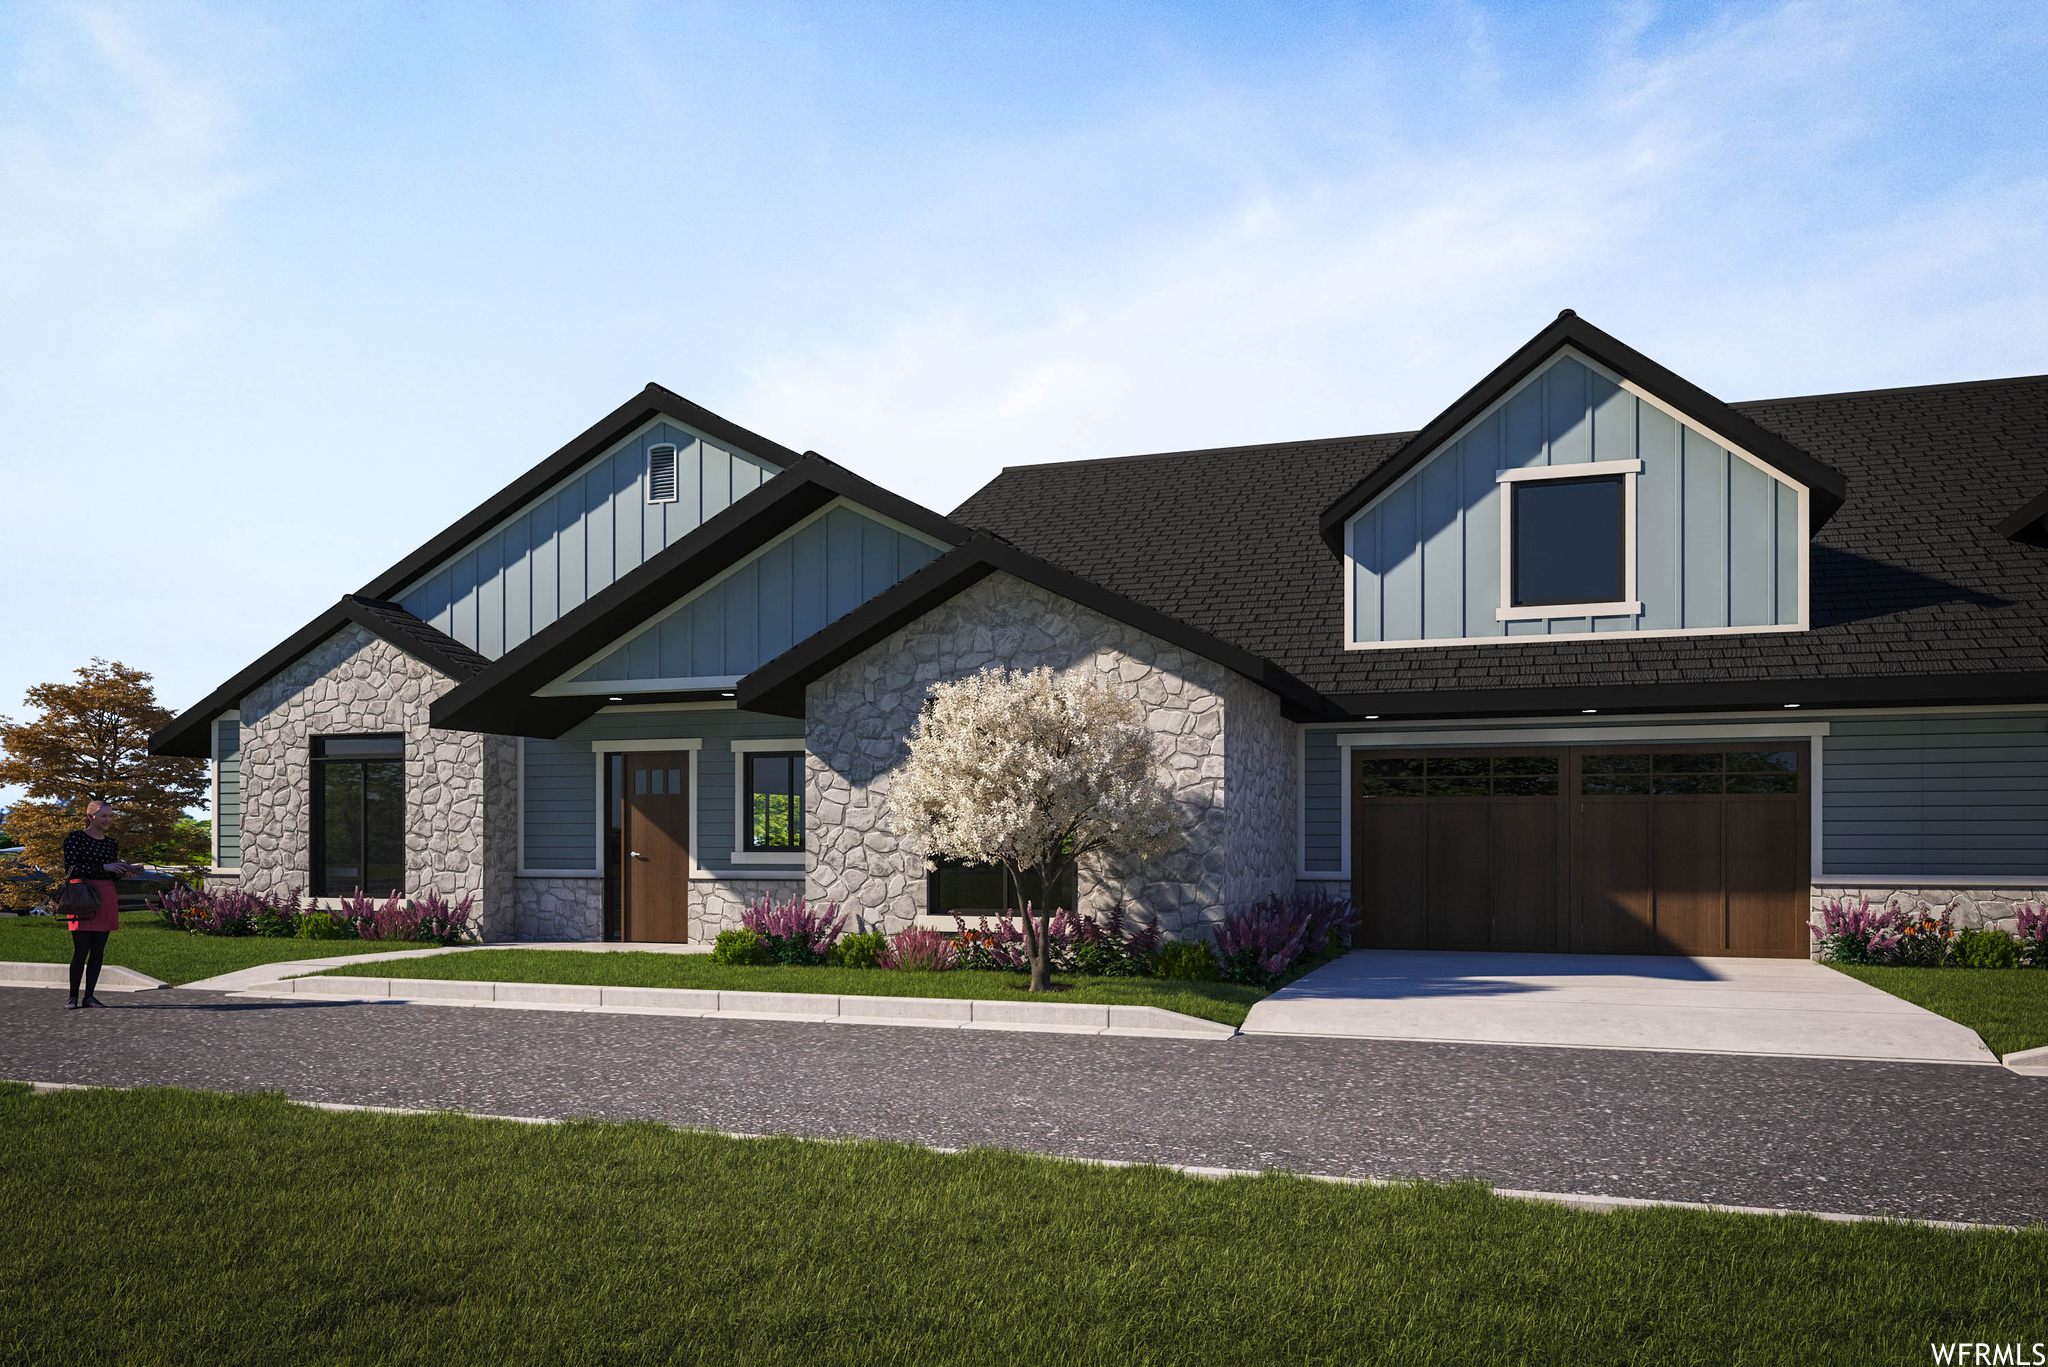 Craftsman inspired home featuring garage and a front yard